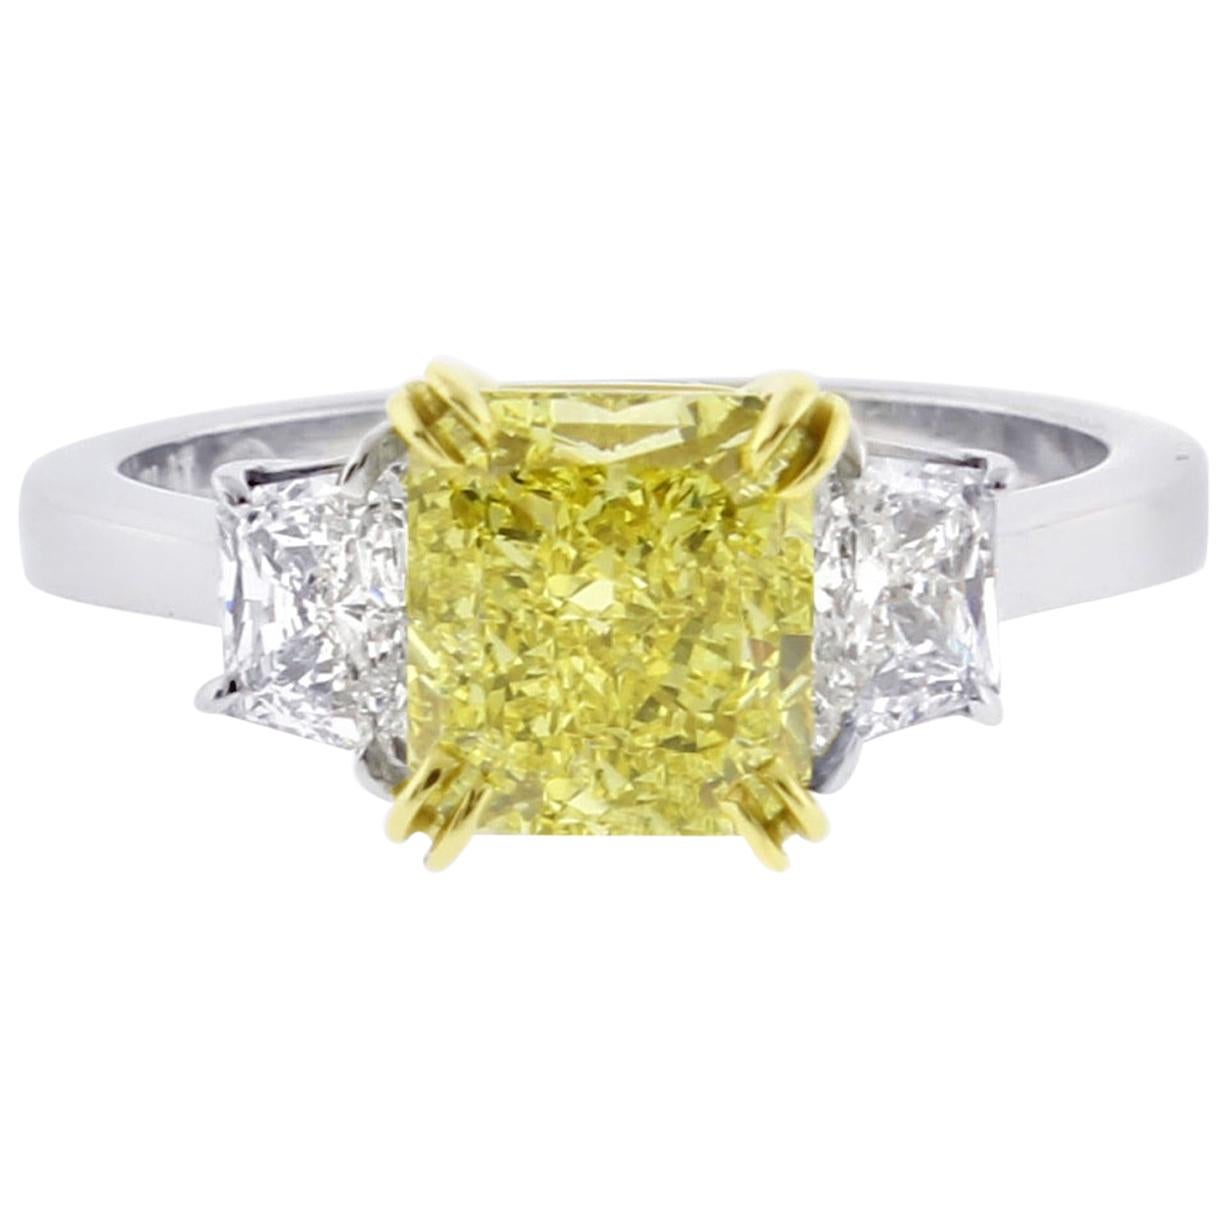 Fancy Intense Yellow 1.74 Carat Radiant Diamond Three-Stone Ring from Pampillona For Sale